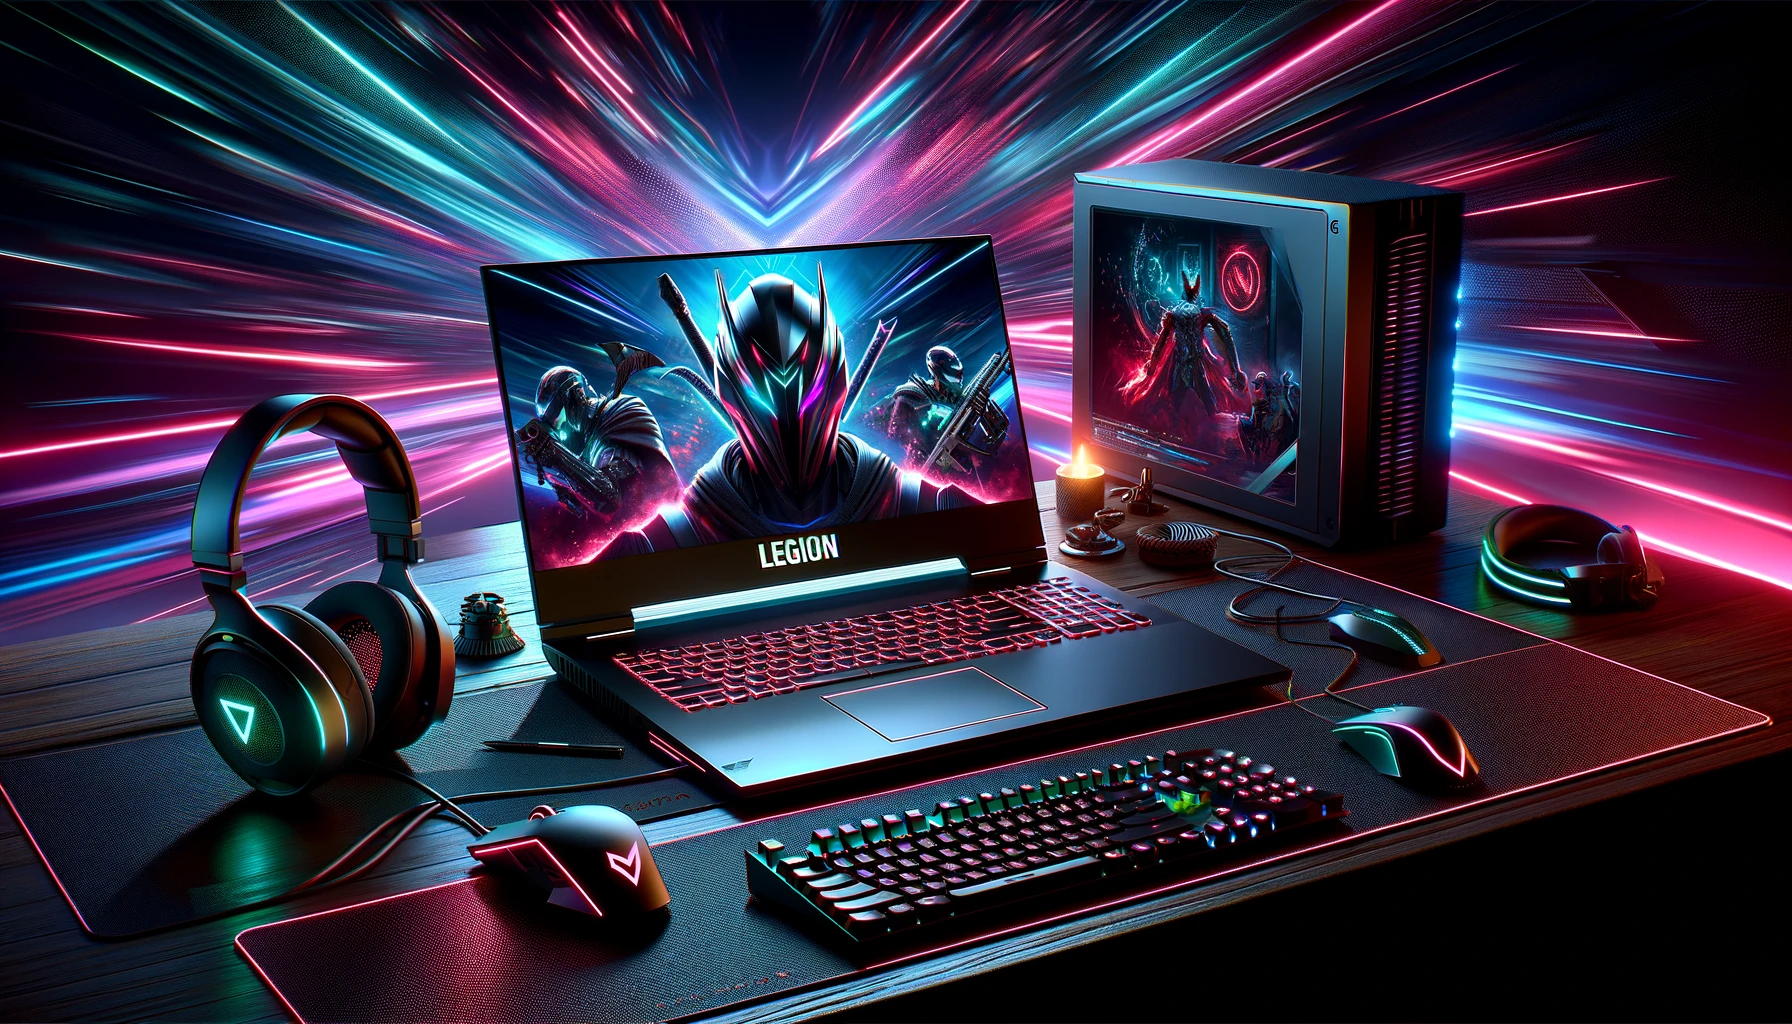 The image above showcases a 3D stock photo illustrating a Lenovo Legion gaming laptop within an intense gaming setup, highlighted by futuristic design elements and vibrant RGB lighting to evoke the thrilling atmosphere of the gaming world.